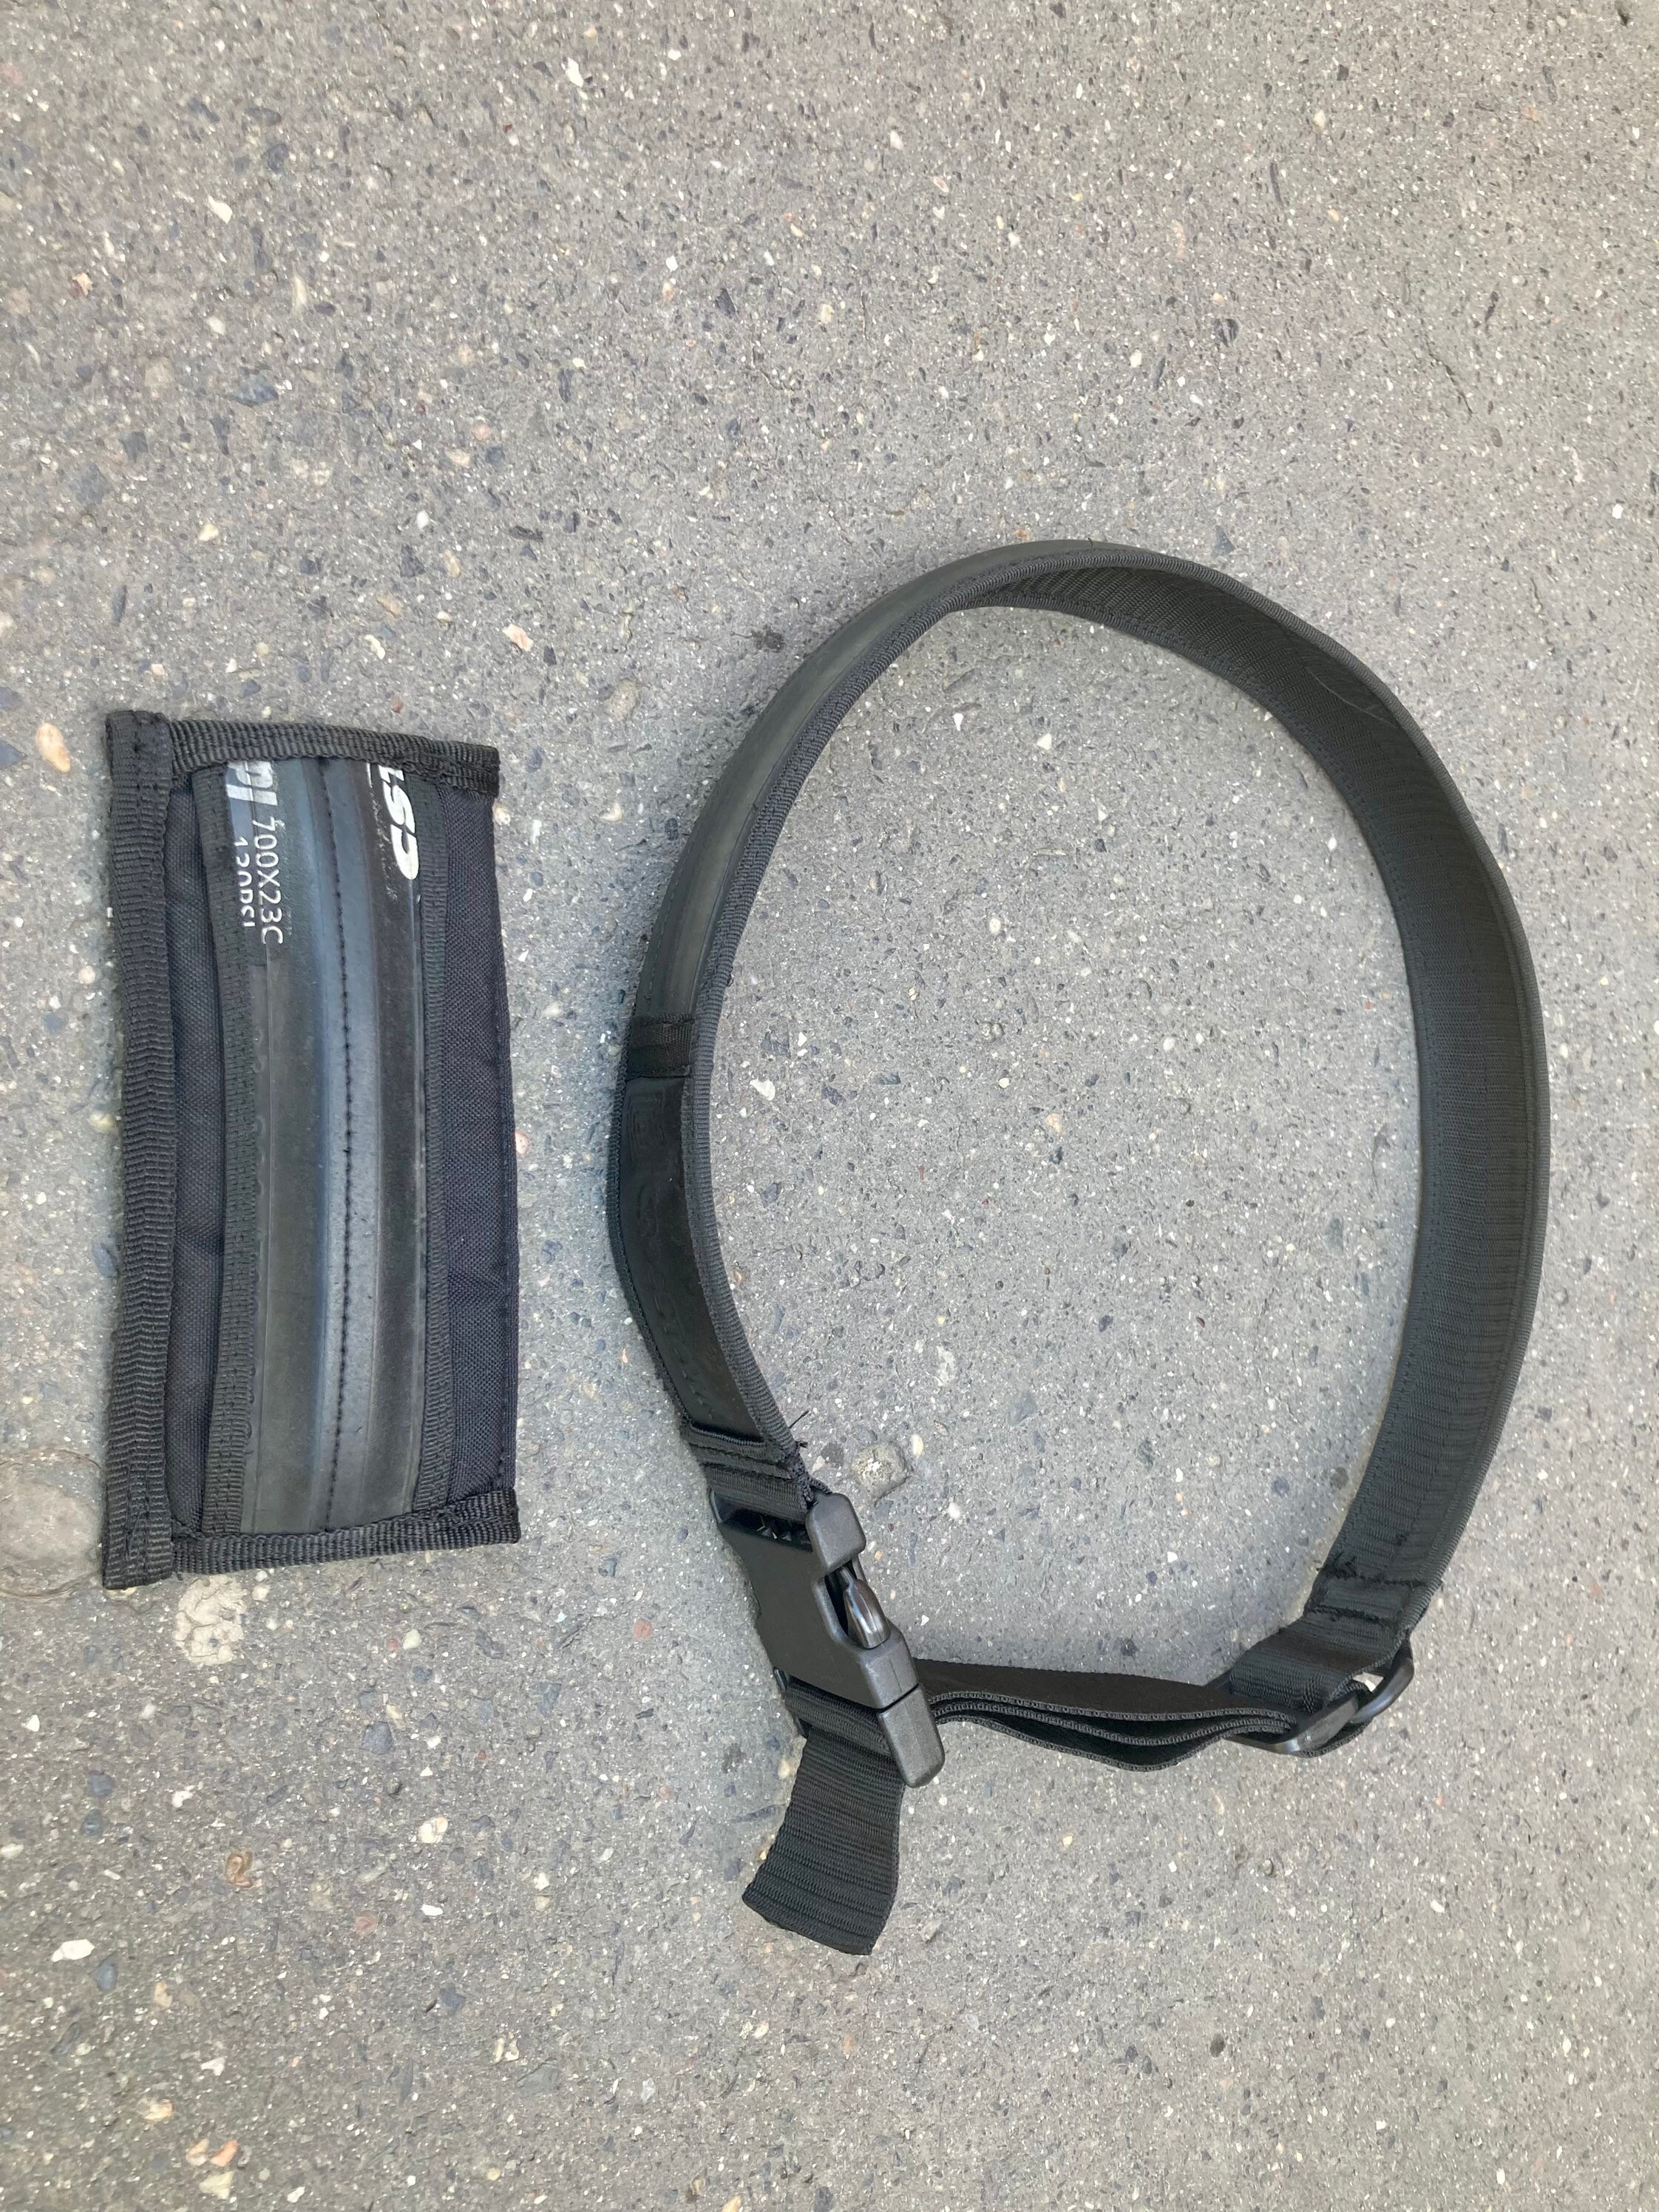 Belt for Hip Pouch With U Lock Holder Made of Recycled Tire 